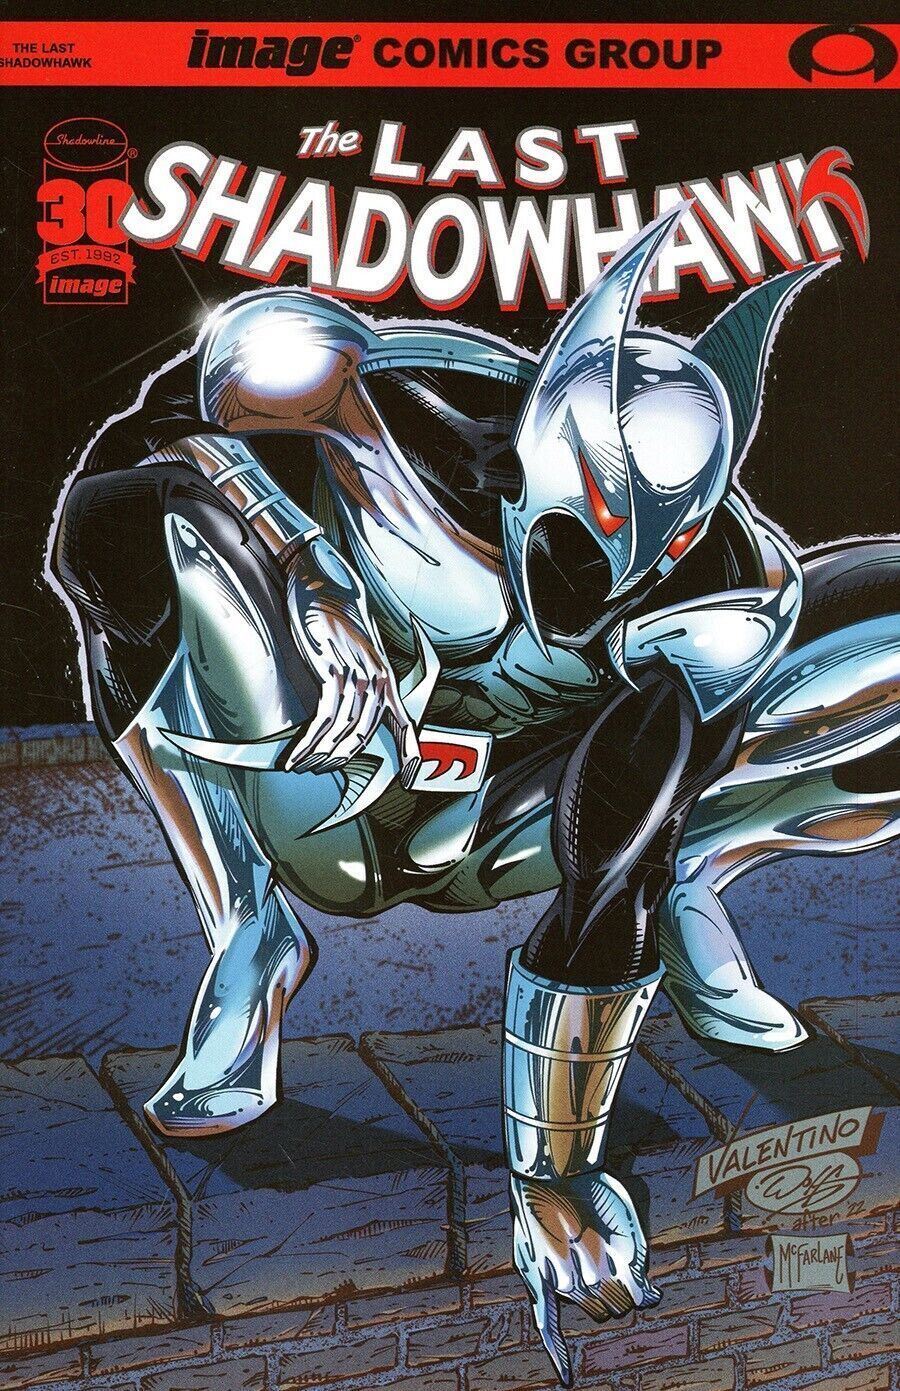 THE LAST SHADOWHAWK  # 1  IMAGE COMICS McFARLANE HOMAGE SPIDER-MAN COVER COLLECTABLE  COMIC BOOK 2022